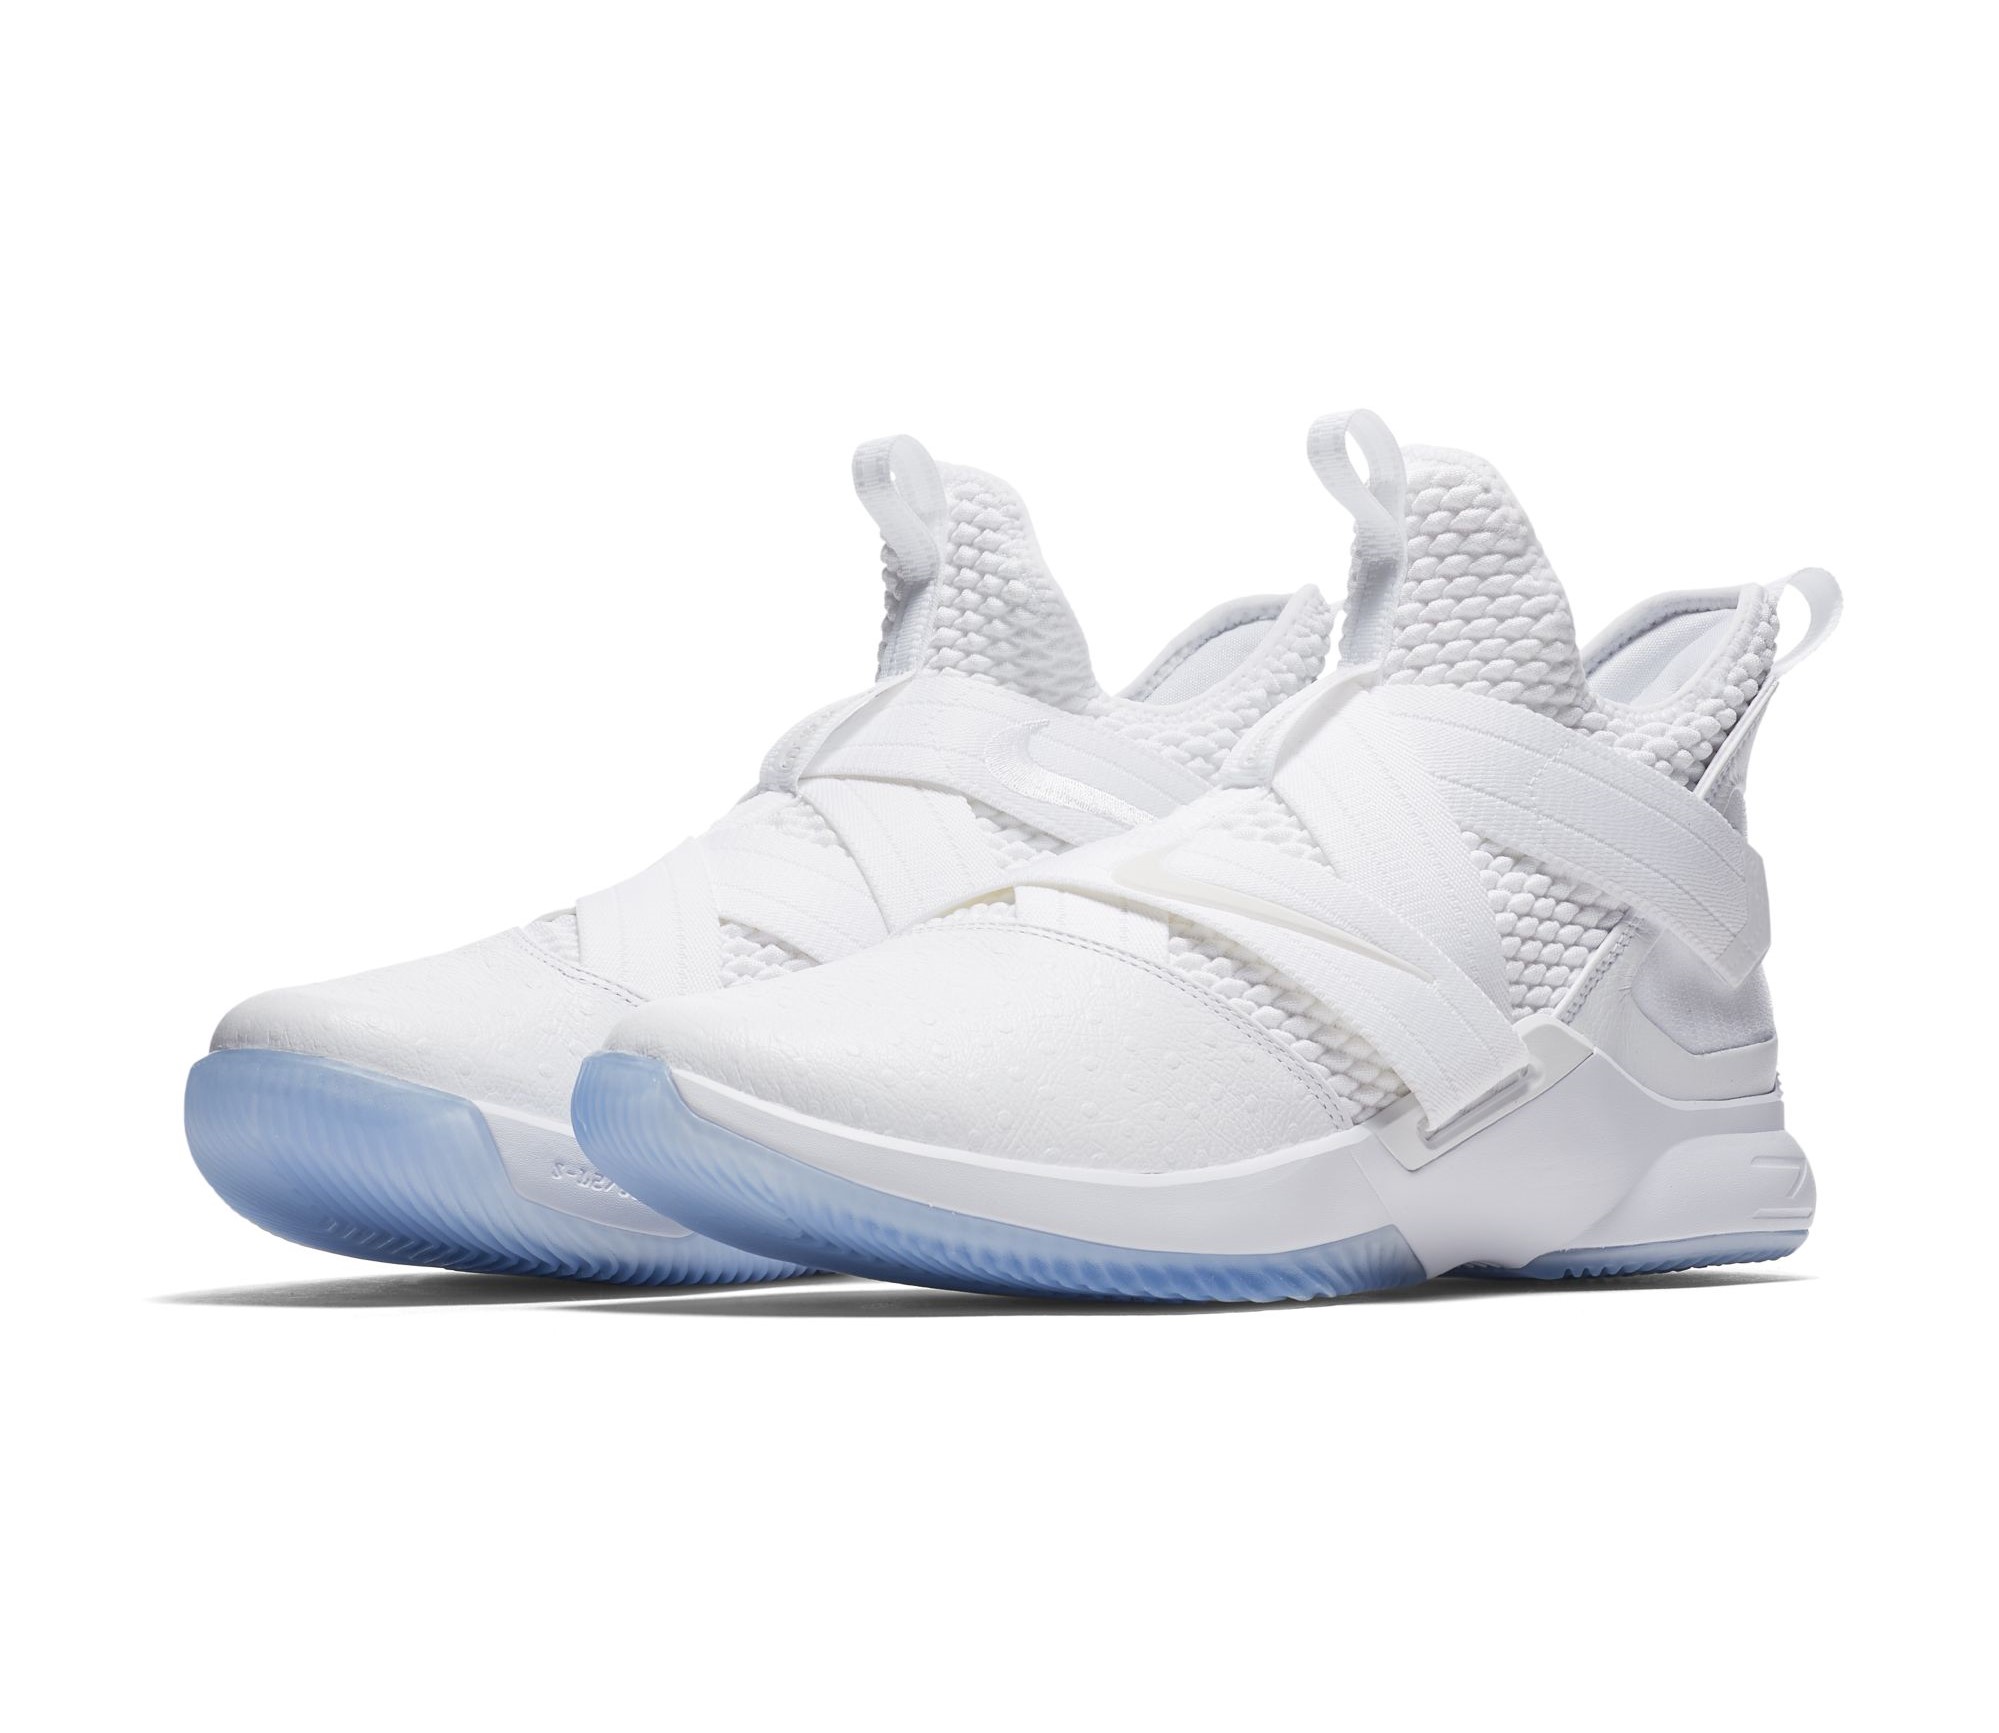 lebron soldier 12 all white cheap online